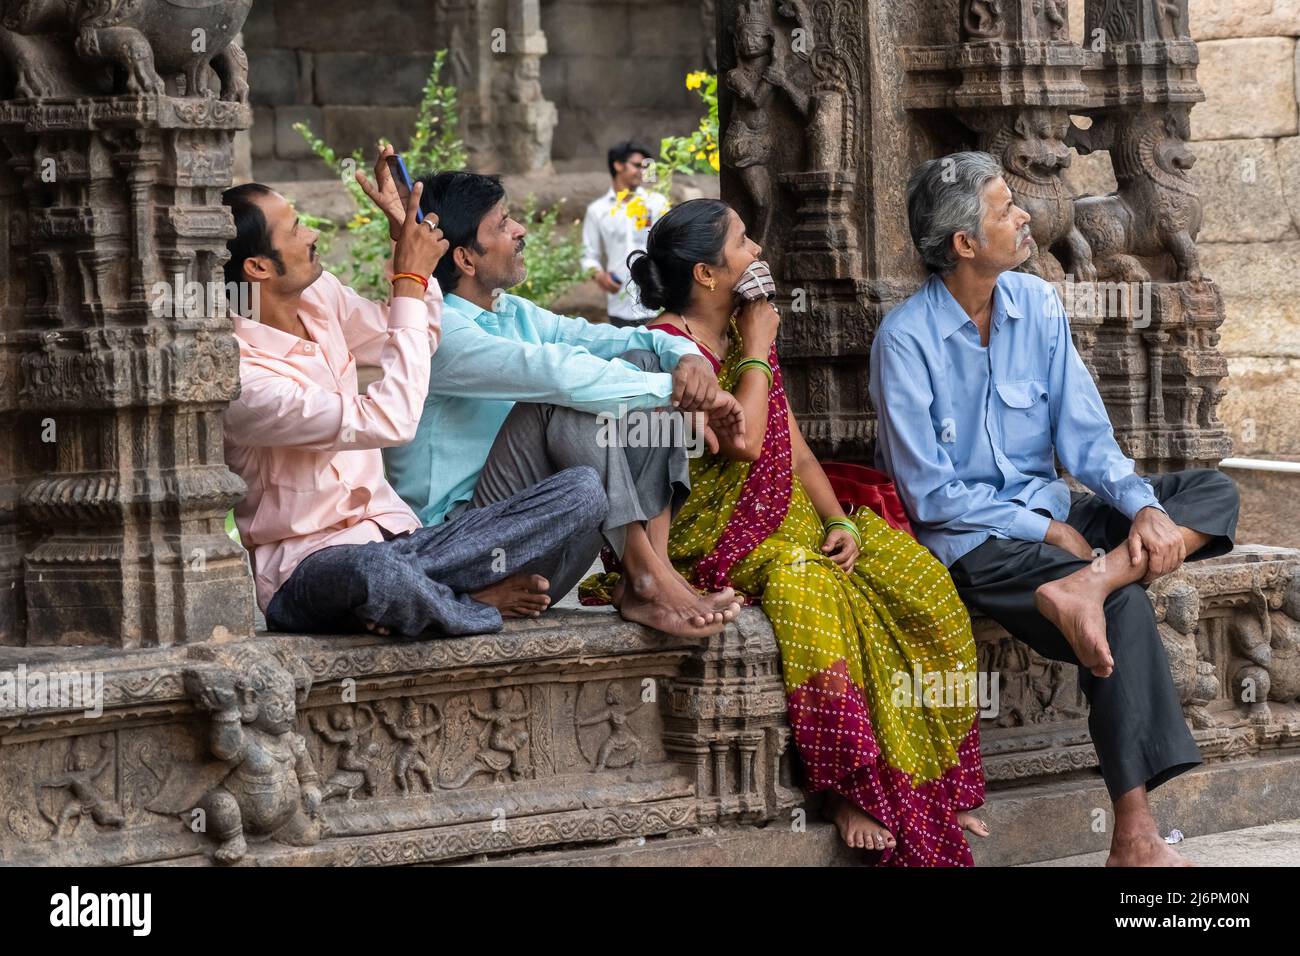 Vellore, Tamil Nadu, India - September 2018: A group of Indian tourists sightseeing at the ancient Jalakandeswarar temple in the Vellore fort. Stock Photo